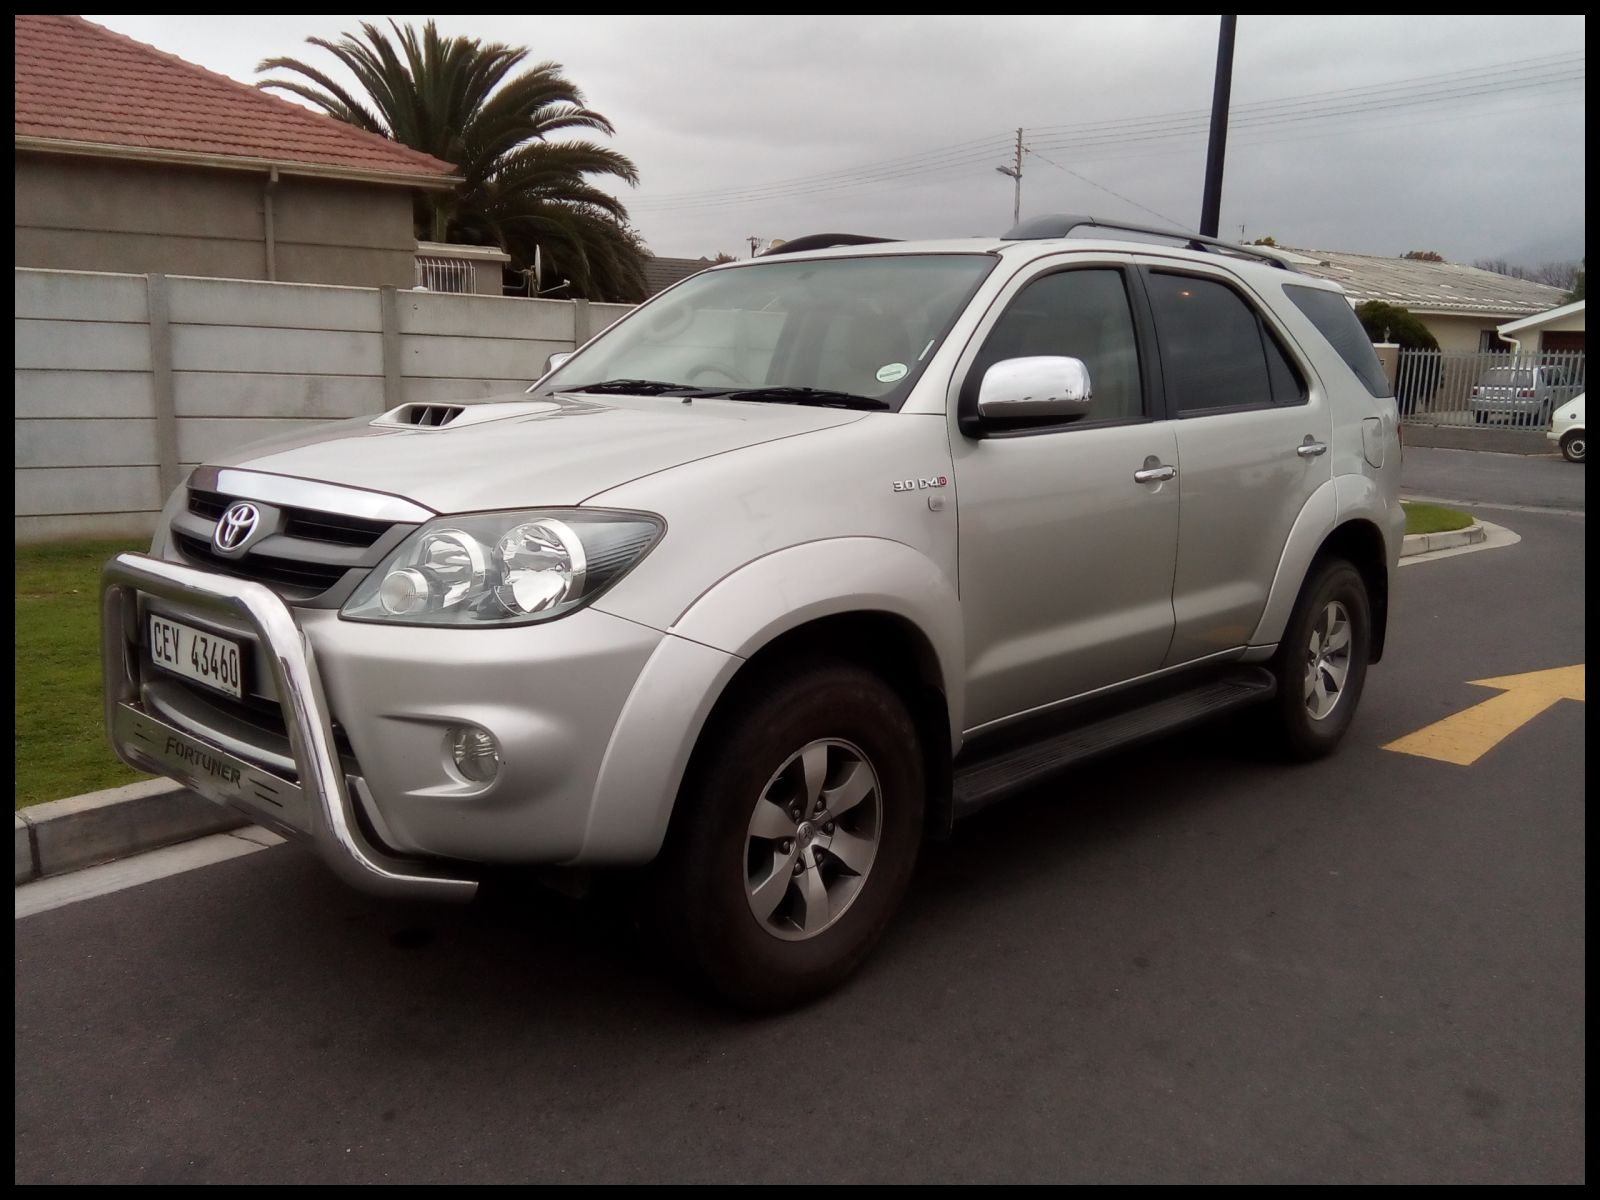 Hot News Autonet Helderberg fortuner fortuner 3 0d 4d Raised Body Price and Review